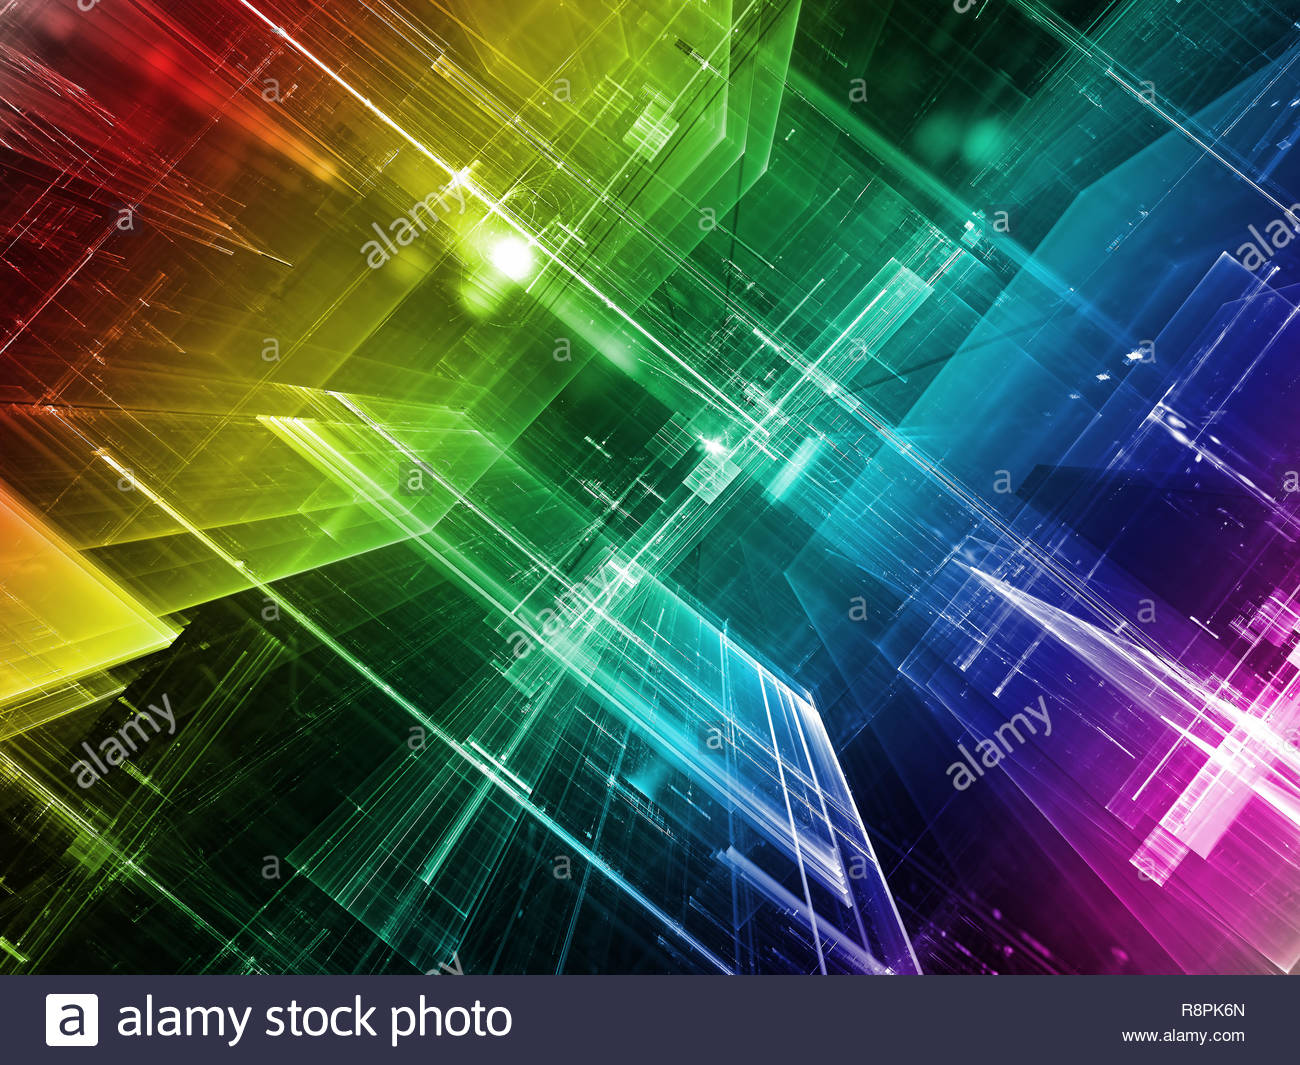 Colorful technology or science fiction background   computer